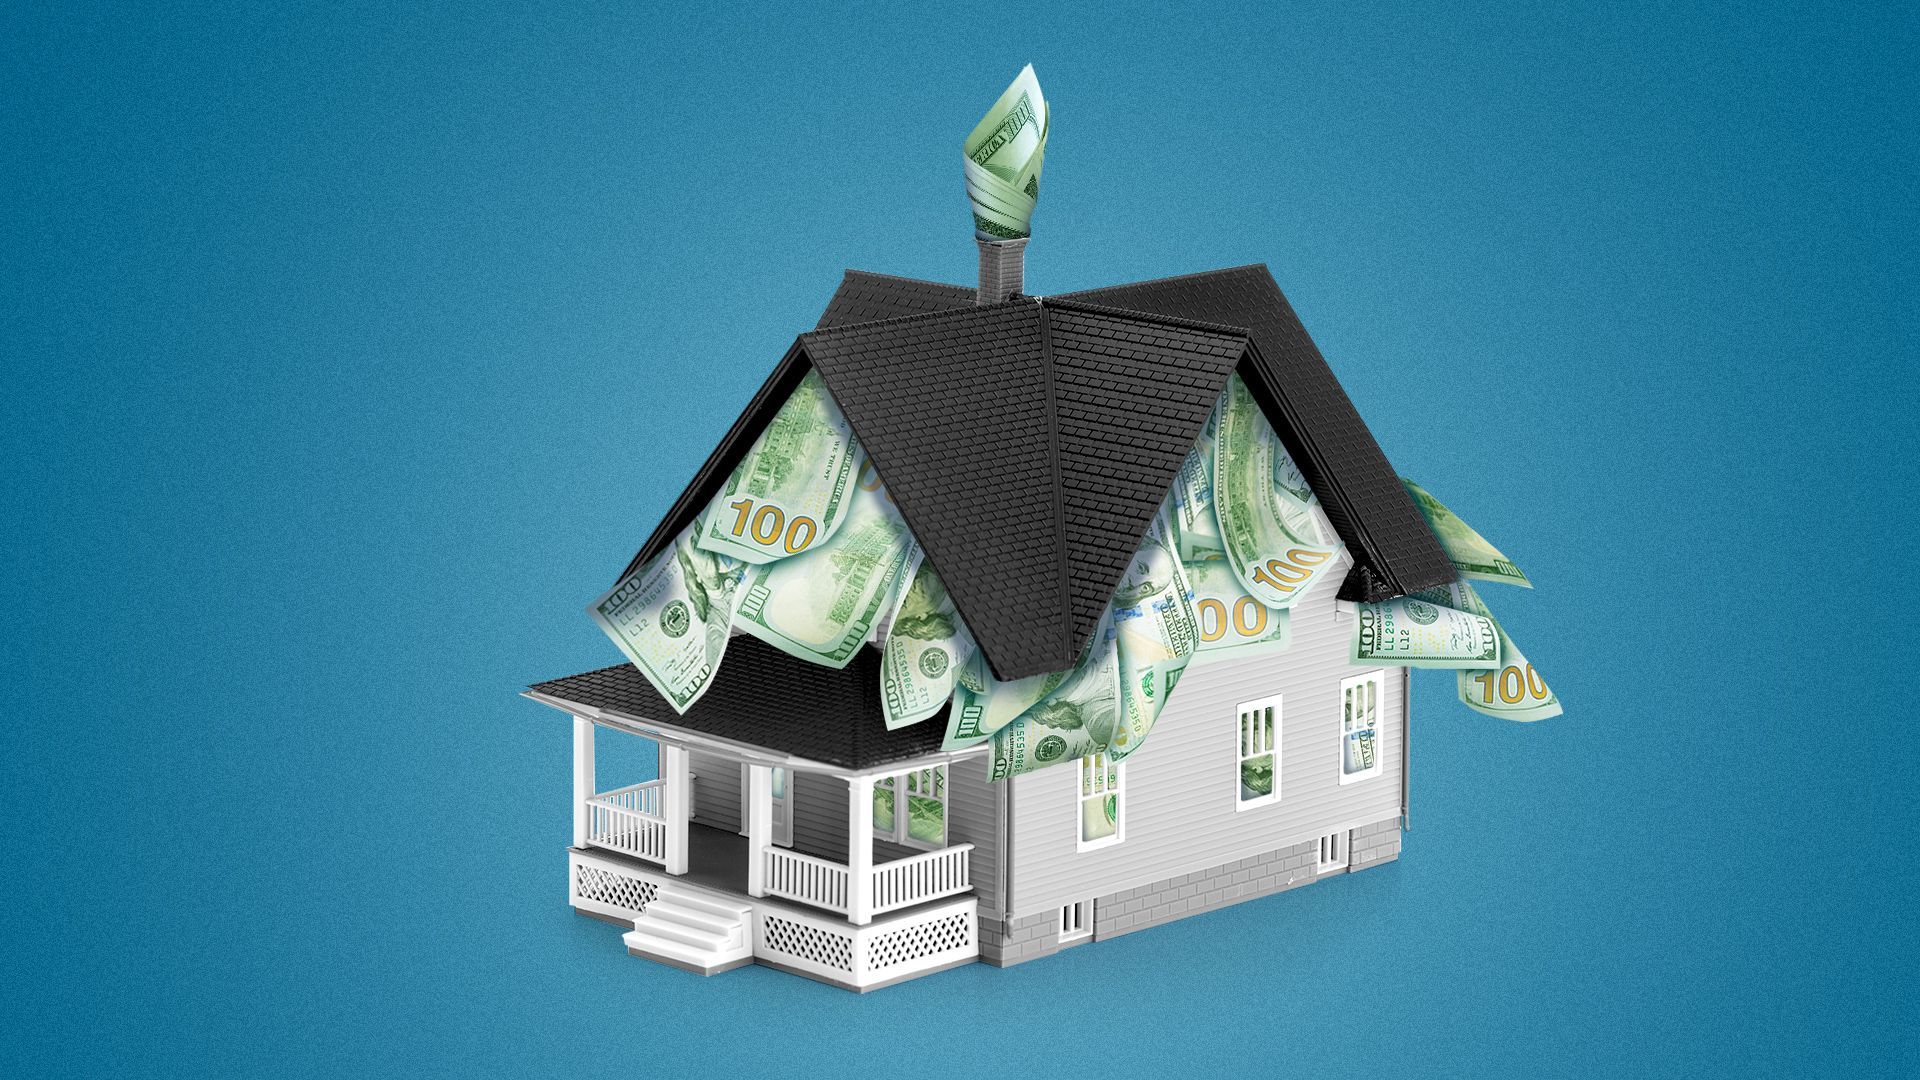 Illustration of a house stuffed to the brim with money, with some bills sticking out from the roof. 